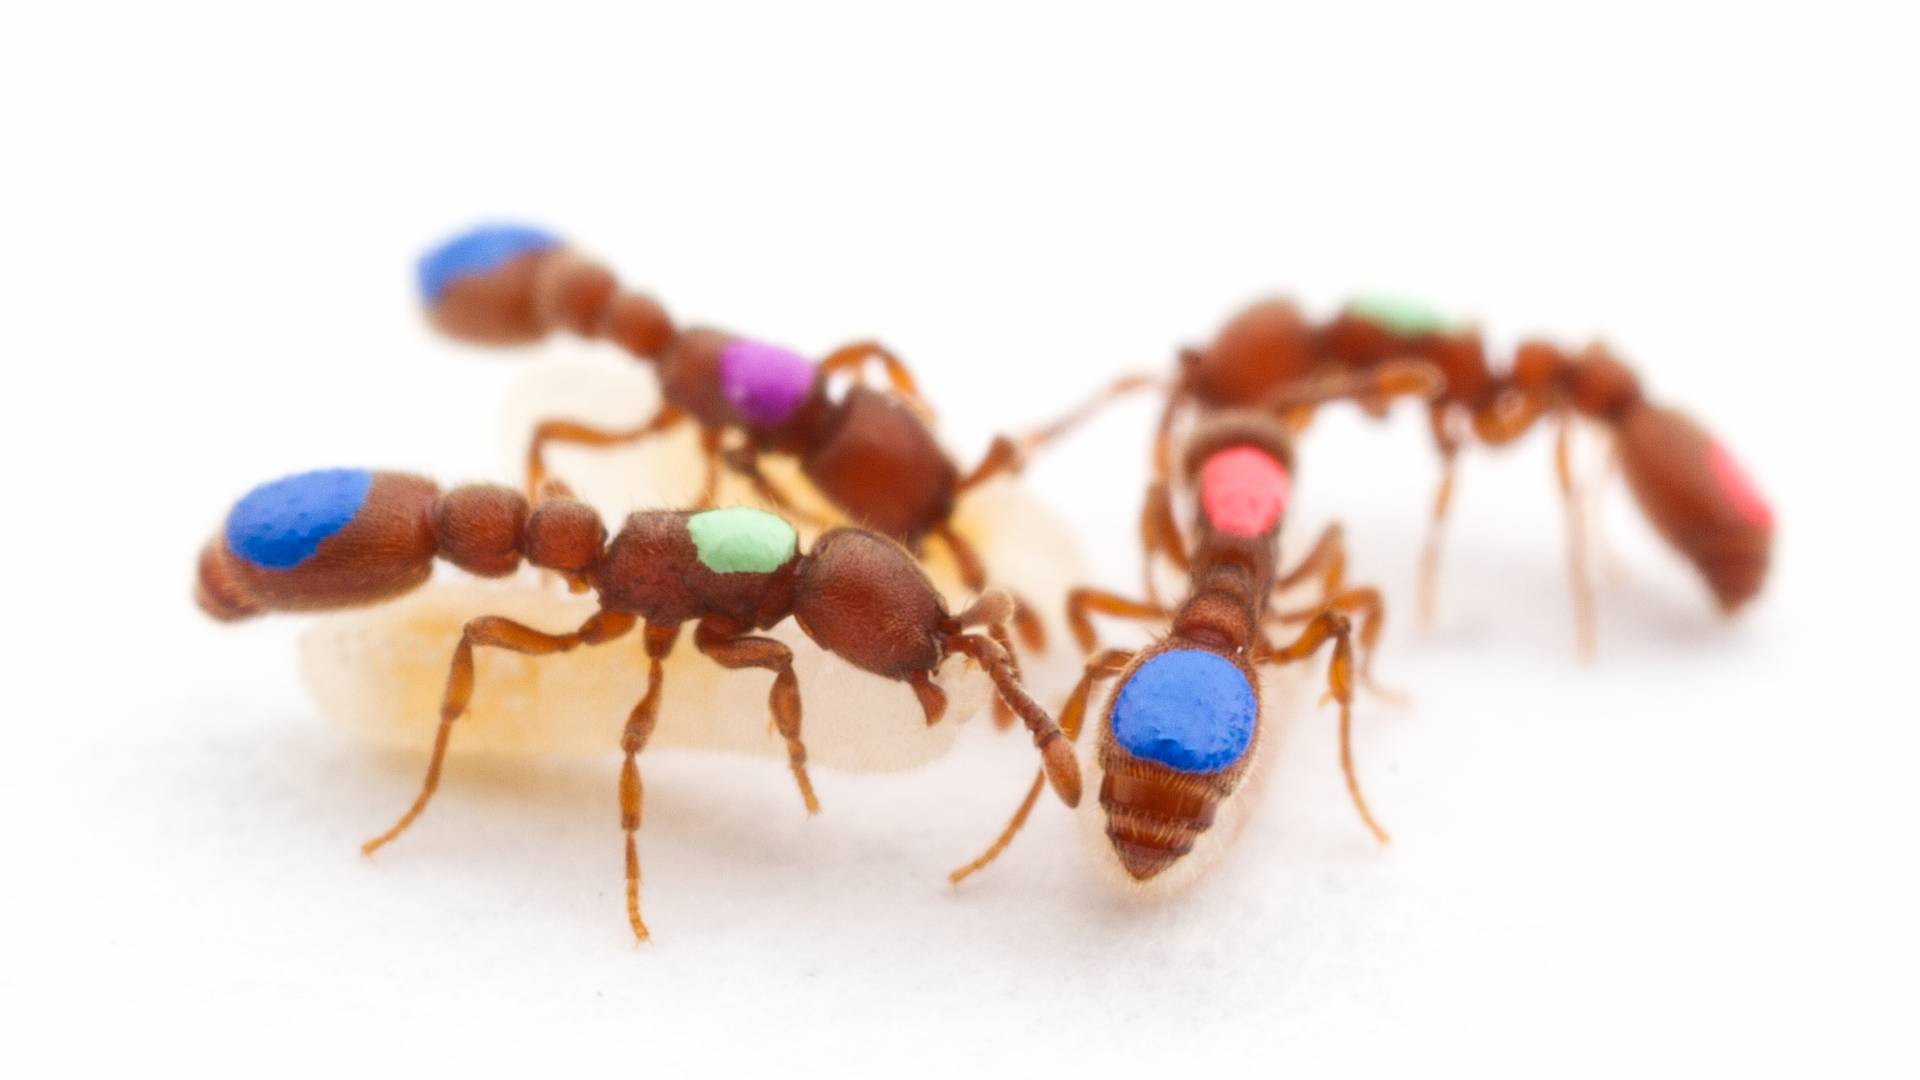 Four ants with colored circles on them gather together